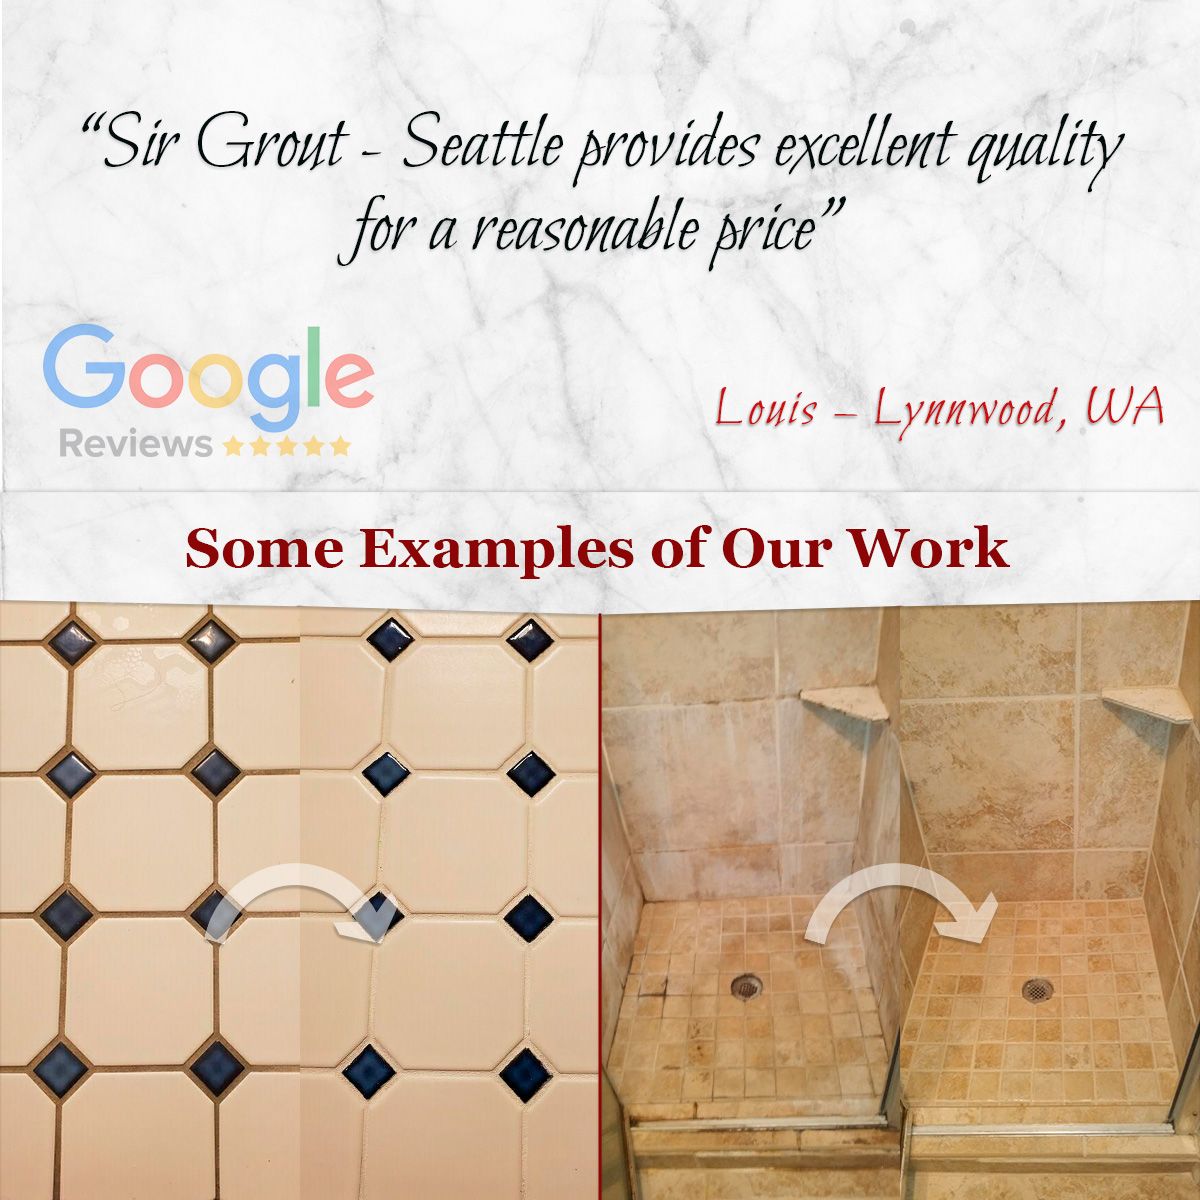 Sir Grout Seattle provides excellent quality for a reasonable price.